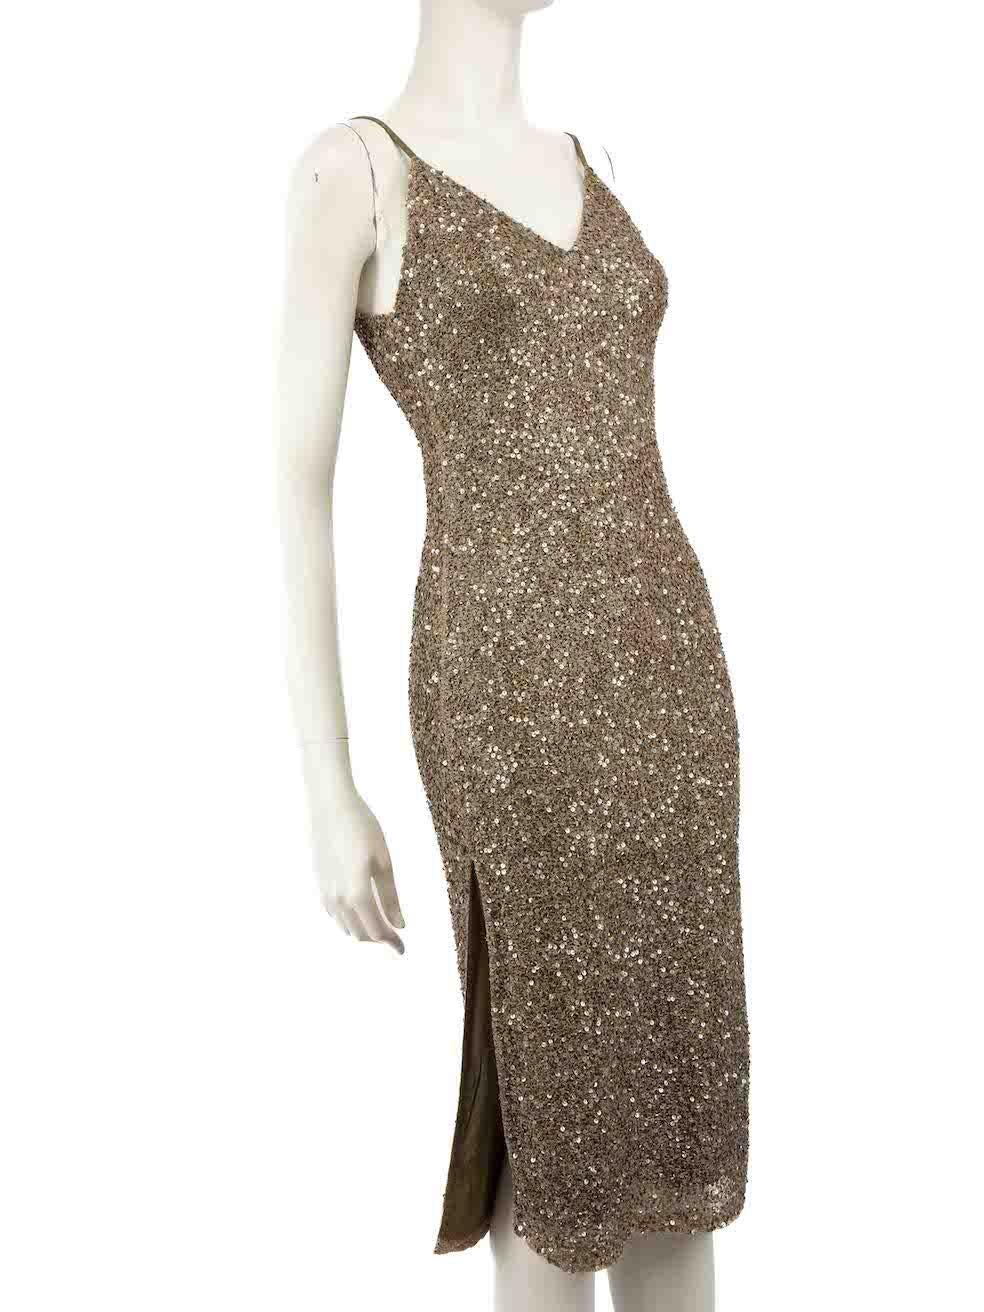 CONDITION is Very good. Hardly any visible wear to dress is evident on this used Alice + Olivia designer resale item.
 
 
 
 Details
 
 
 Brown
 
 Synthetic
 
 Dress
 
 V-neck
 
 Sequinned
 
 Sleeveless
 
 Midi
 
 Adjustable shoulder straps
 
 Side